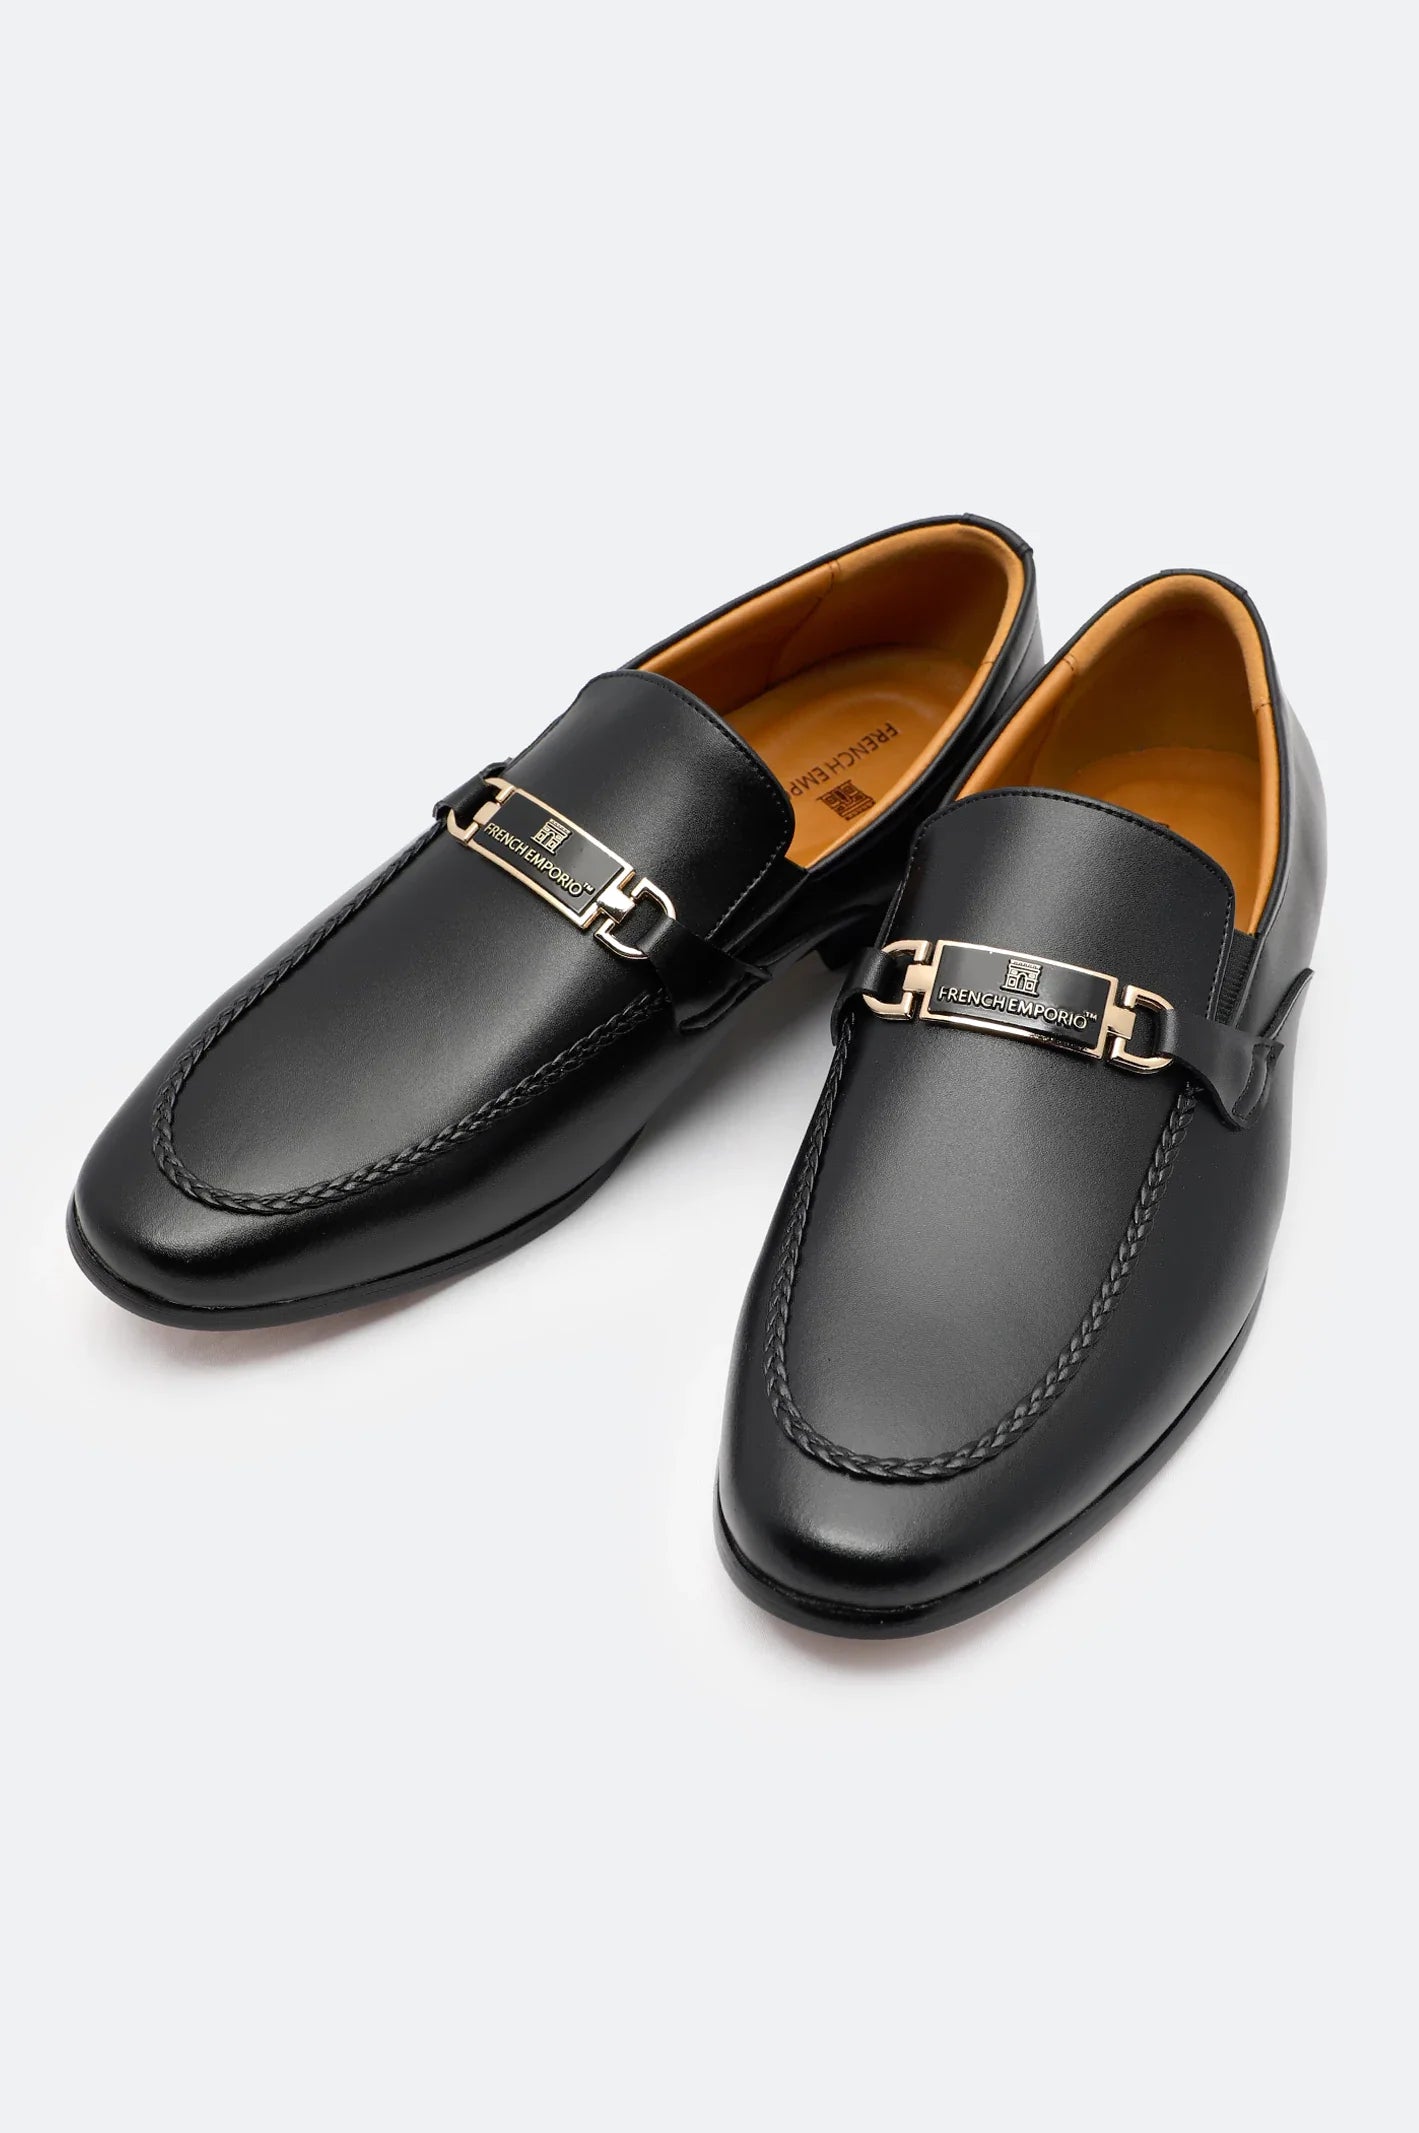 Black Formal Mocassins Shoes Premium Shoes From French Emporio By Diners